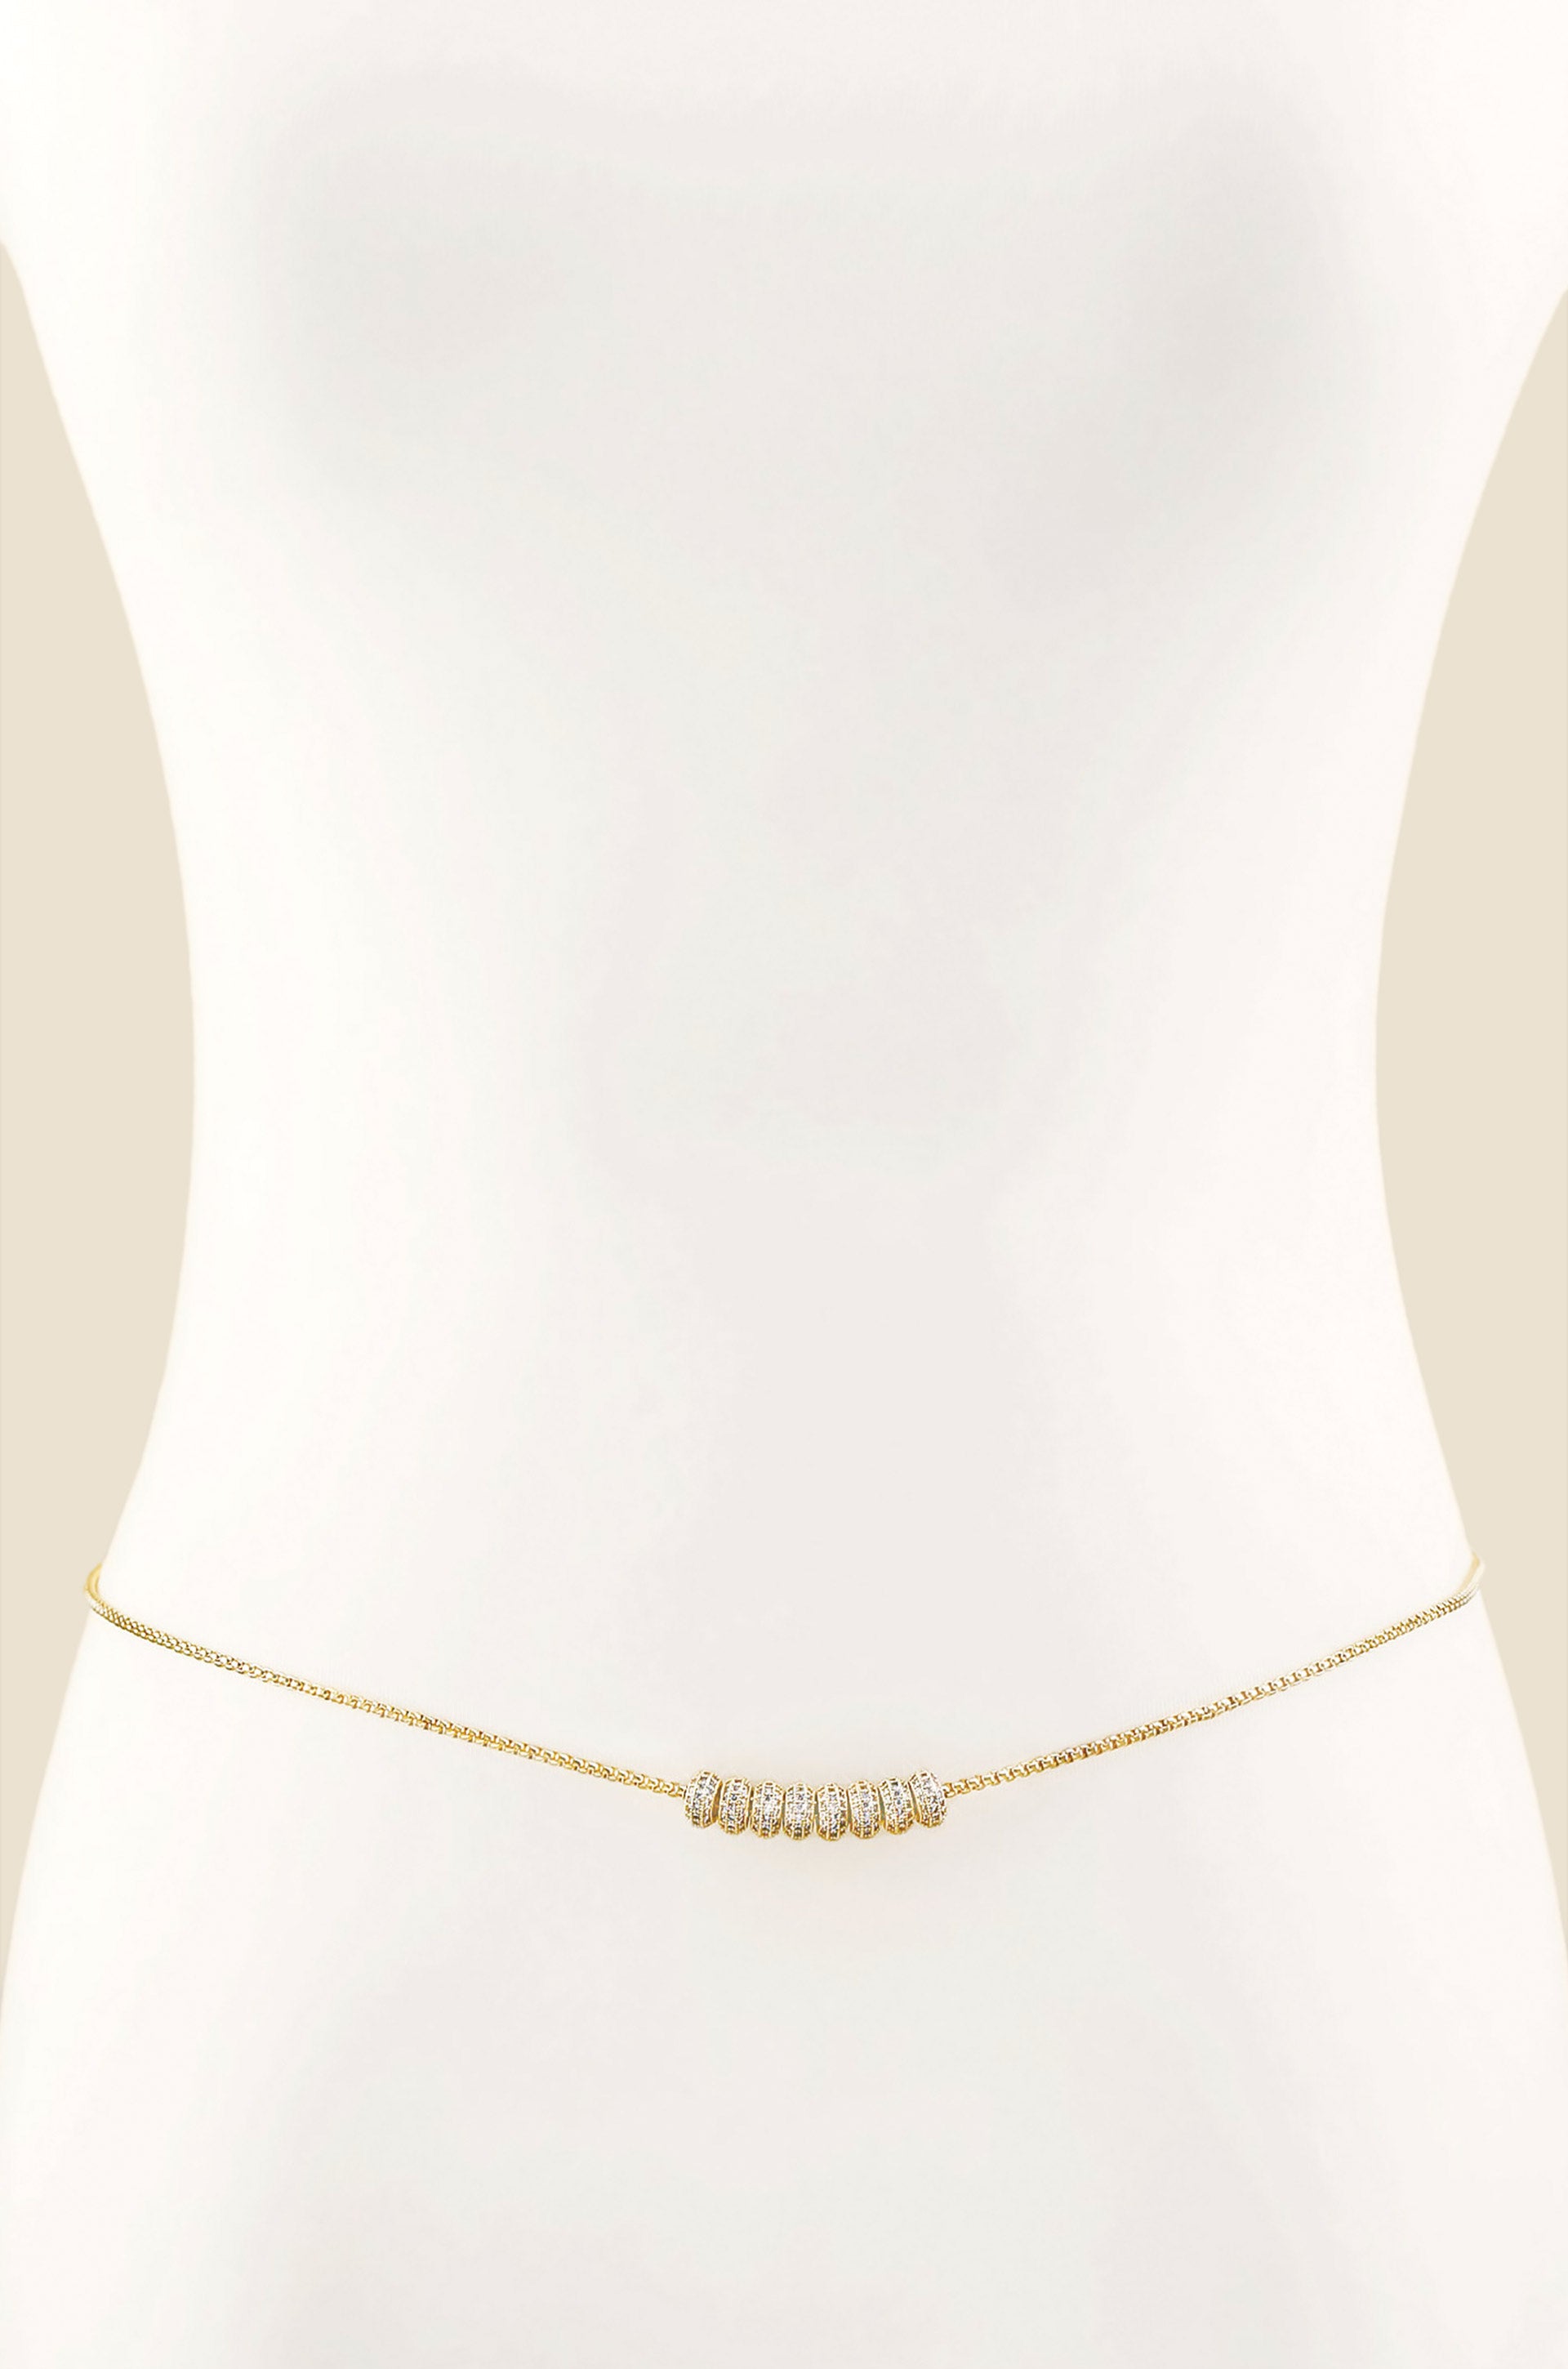 Tennis Belly Chain in Gold